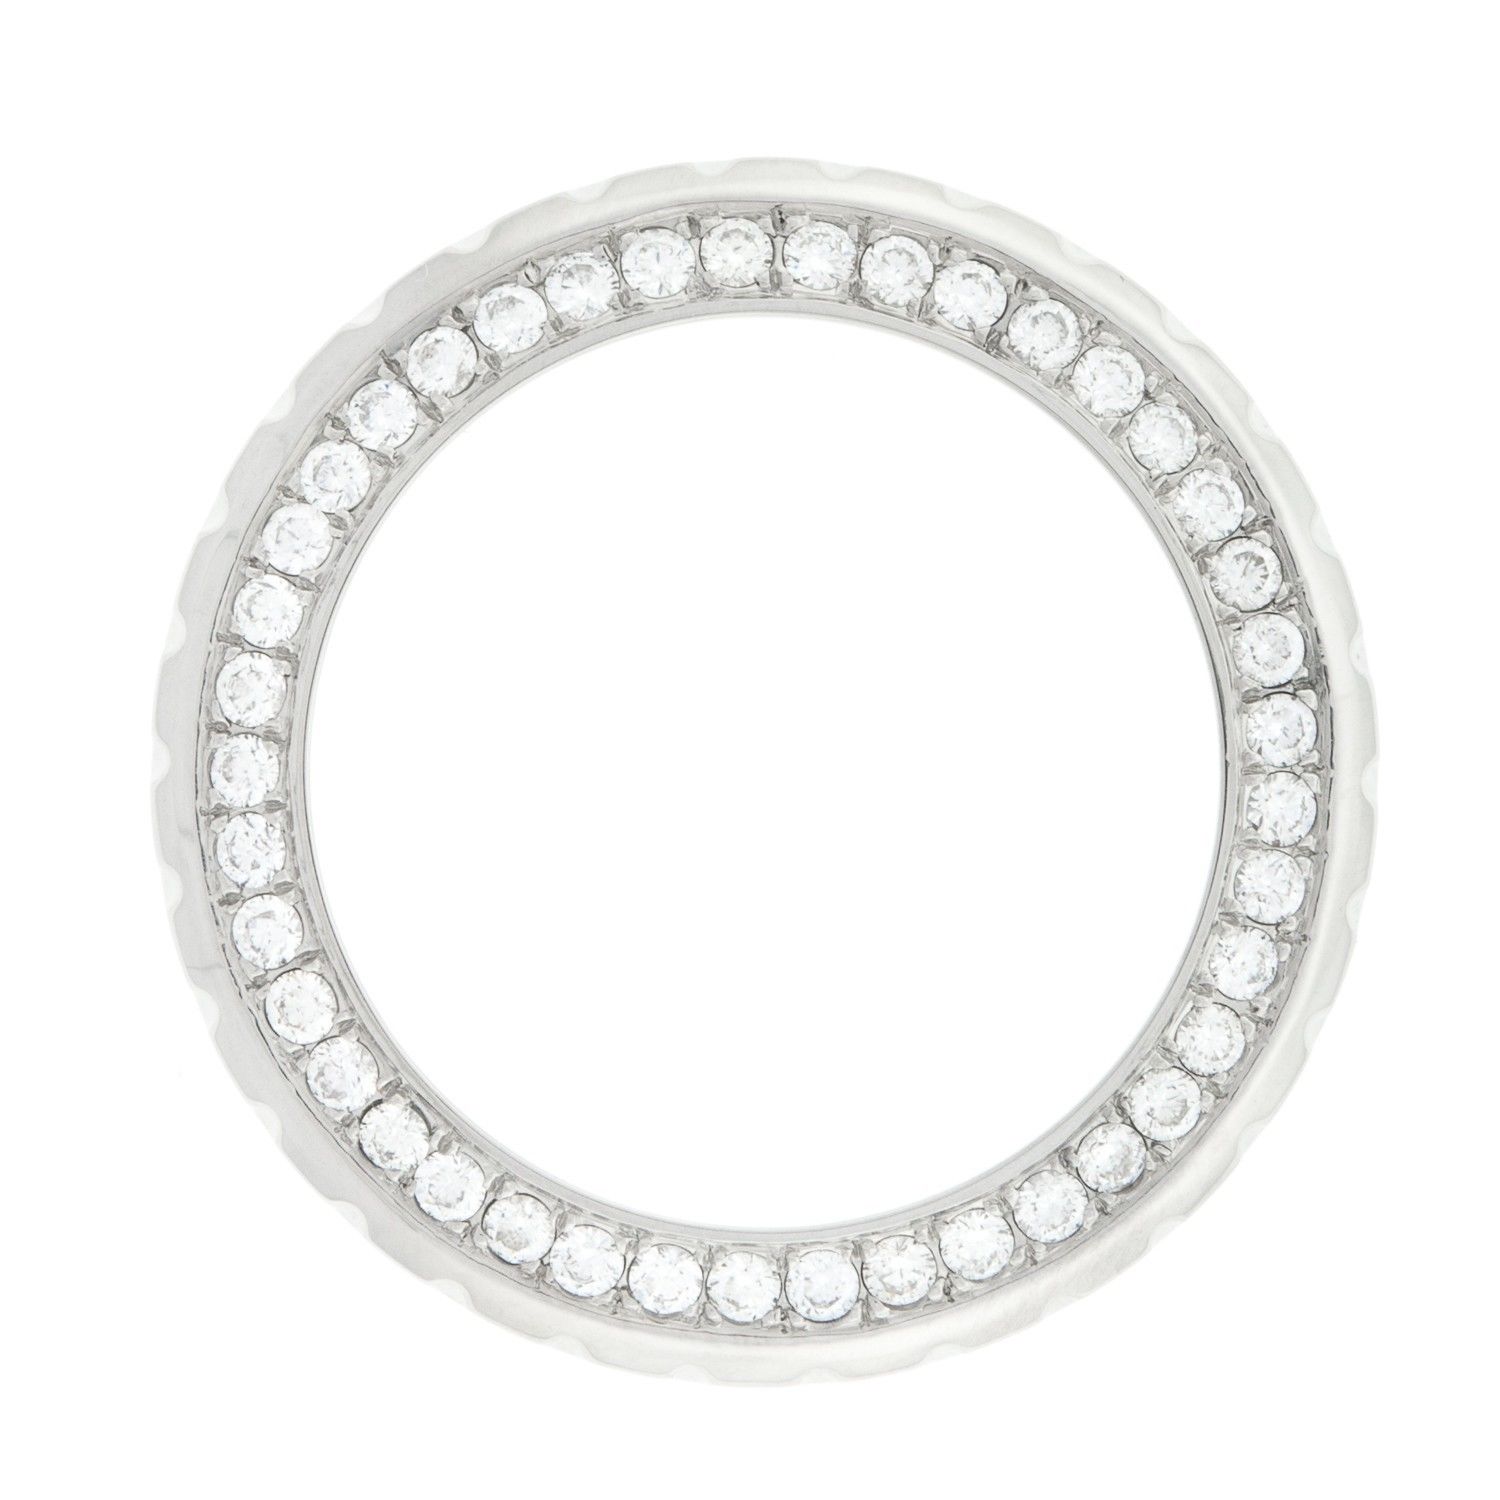 Buy Ladies Custom Made Chanel J12 White Stainless Steel Diamond Bezel  2.00ct Online at SO ICY JEWELRY